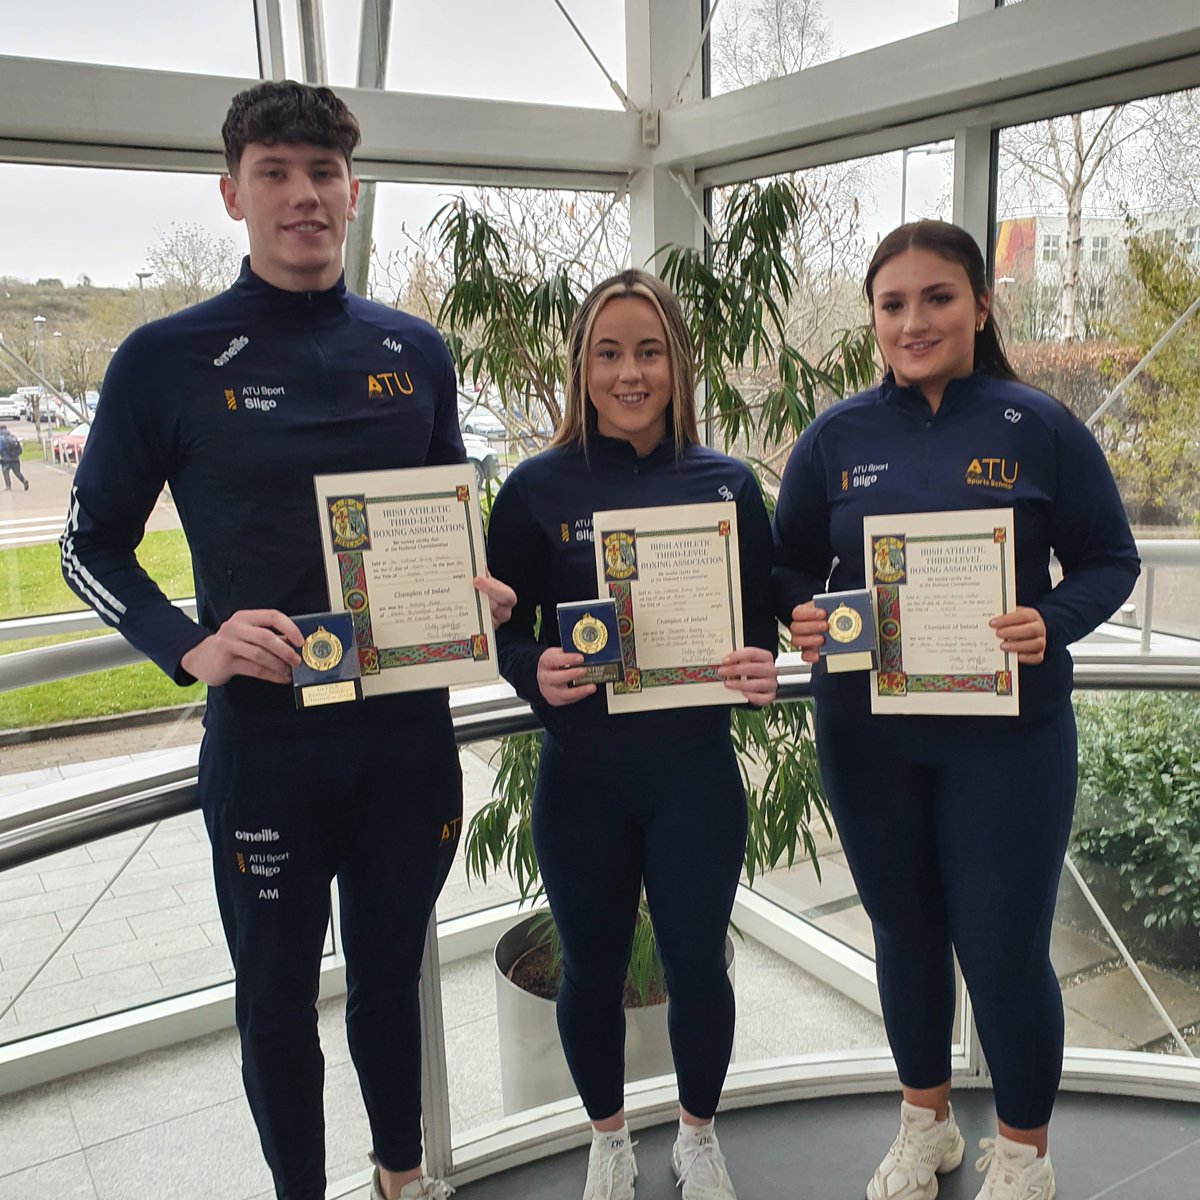 🎉 Massive congratulations to ATU Sligo and ATU St Angelas students Dearbhla Rooney, Clíona D'Arcy and Anthony Maher who each claimed boxing gold at the recent IATBA Championships. Well done all 🥊🔥 #boxing #champions #gold #IATBA #sport #university #AtlanticTU